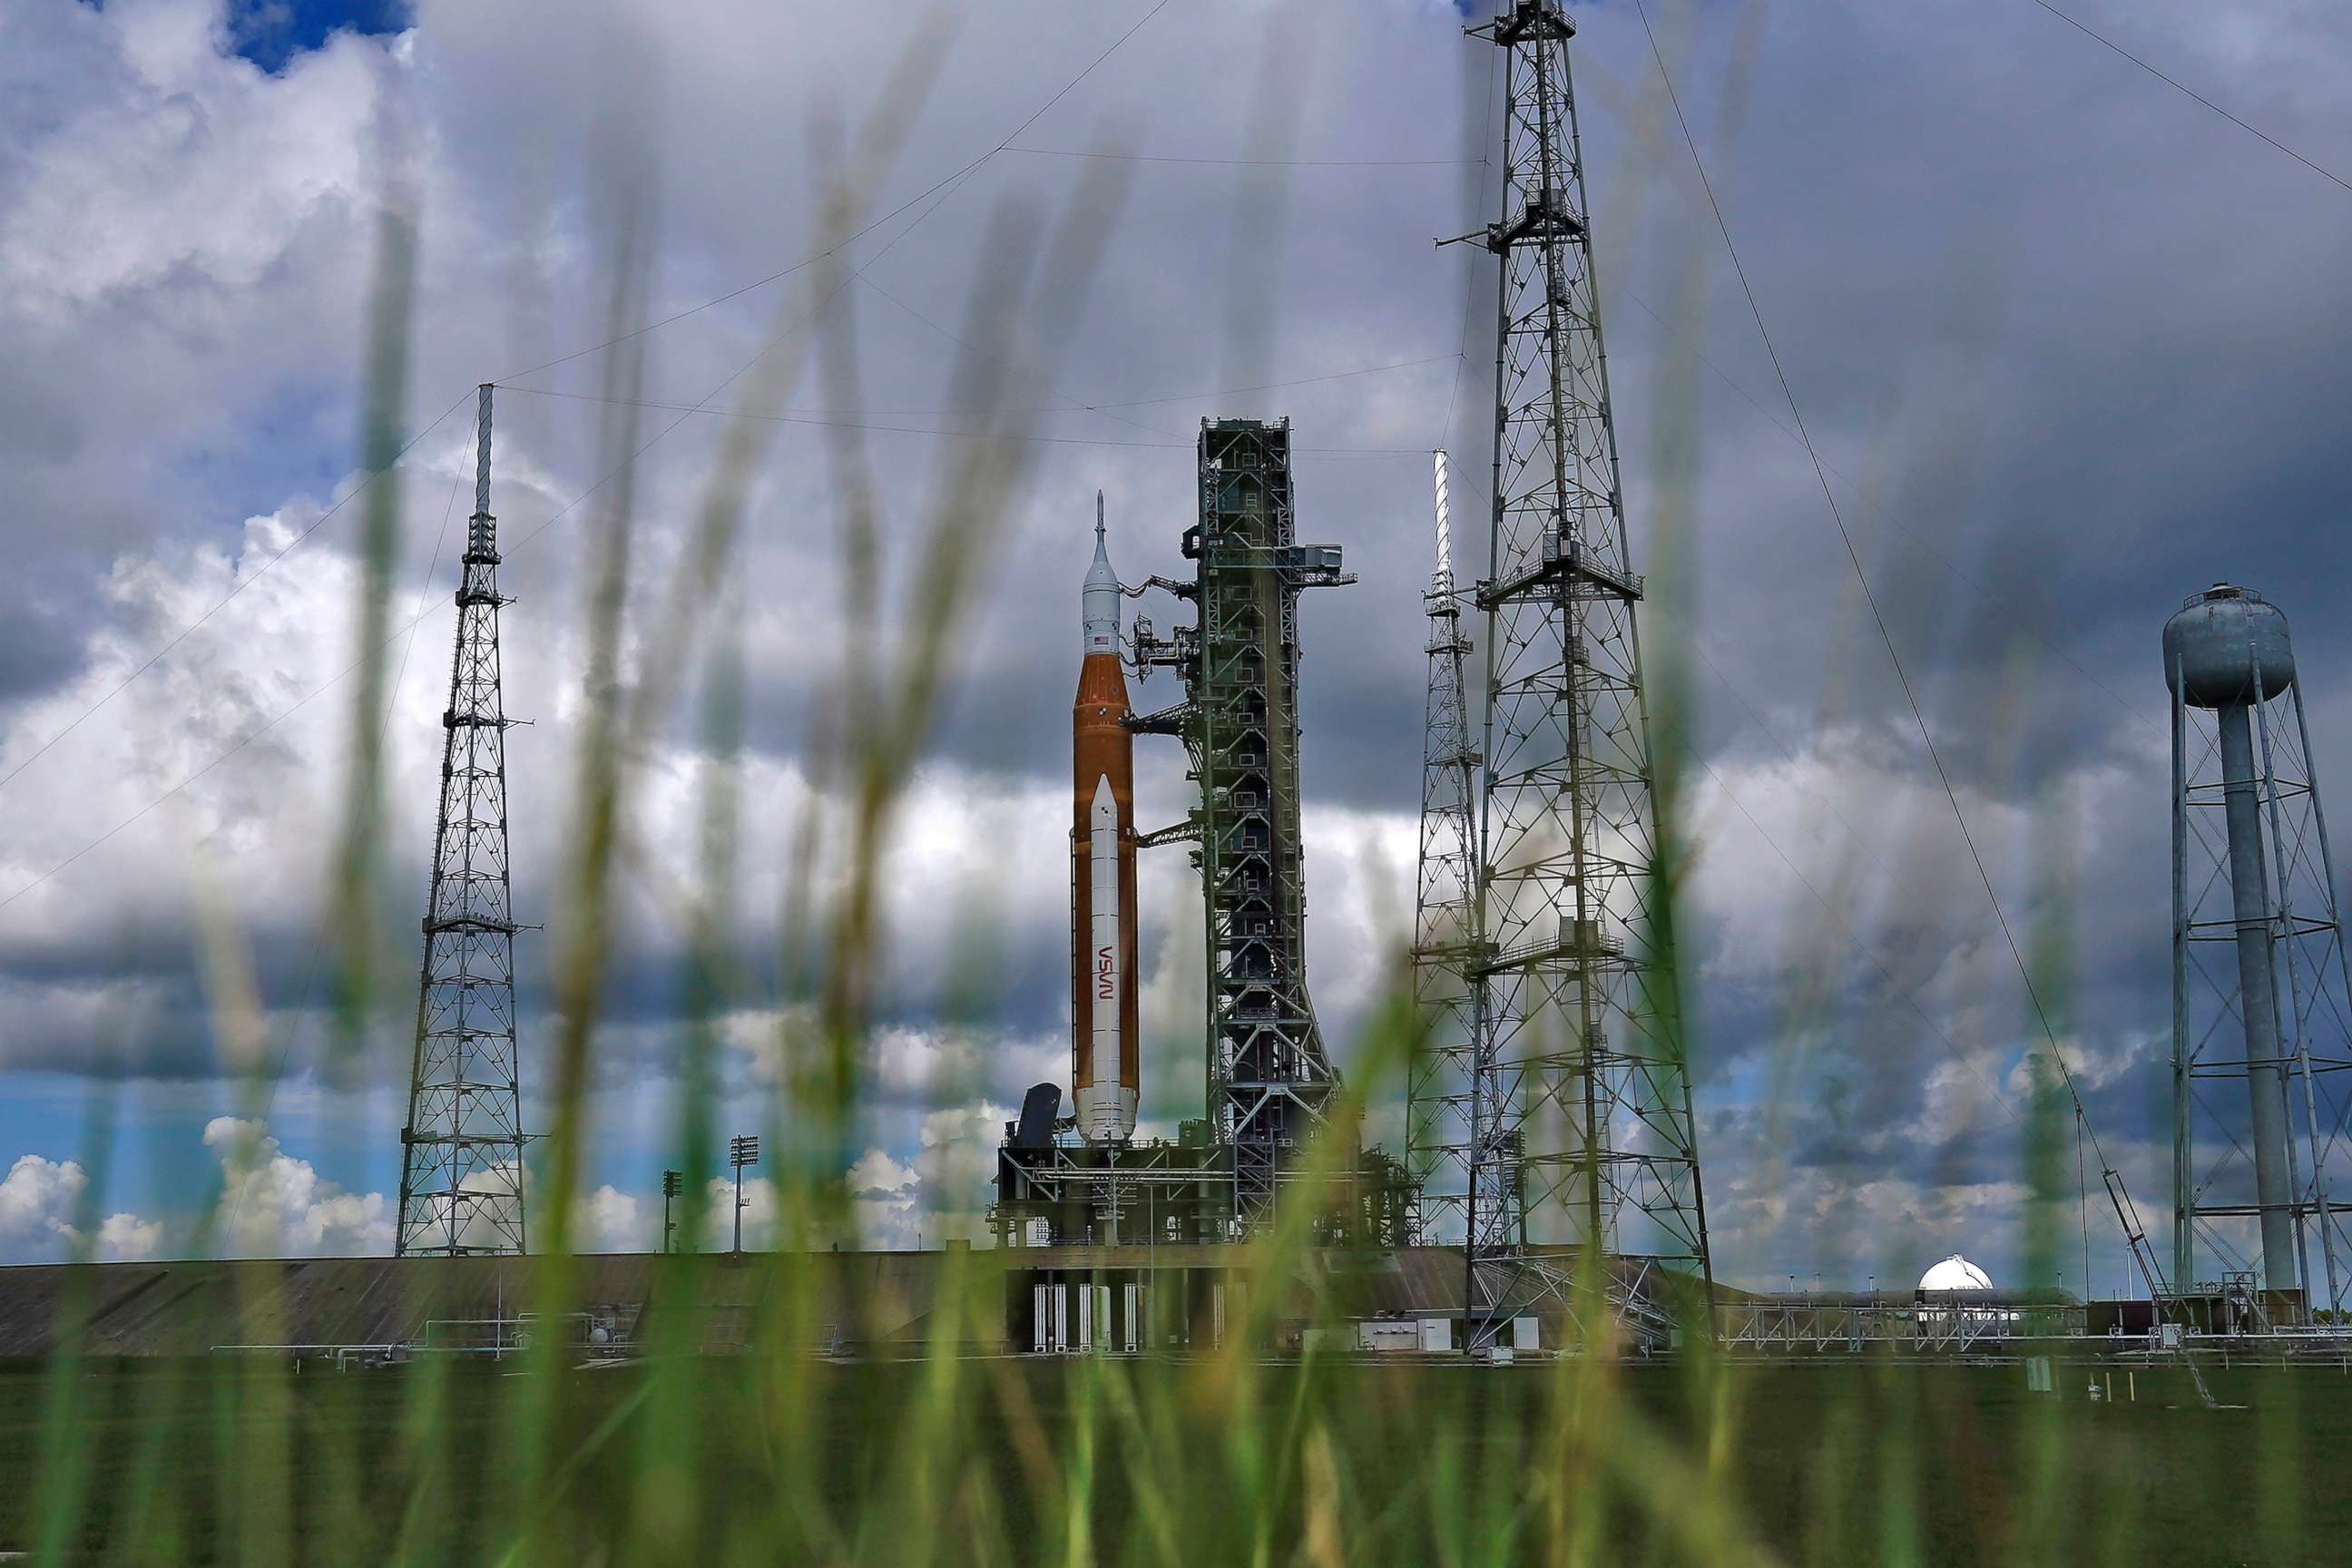 PHOTO: The Artemis 1 rocket is framed by tall grass as she stands ready on Launch Pad 39-B at the Kennedy Space Center, Aug. 26, 2022, in Cape Canaveral, Fla.